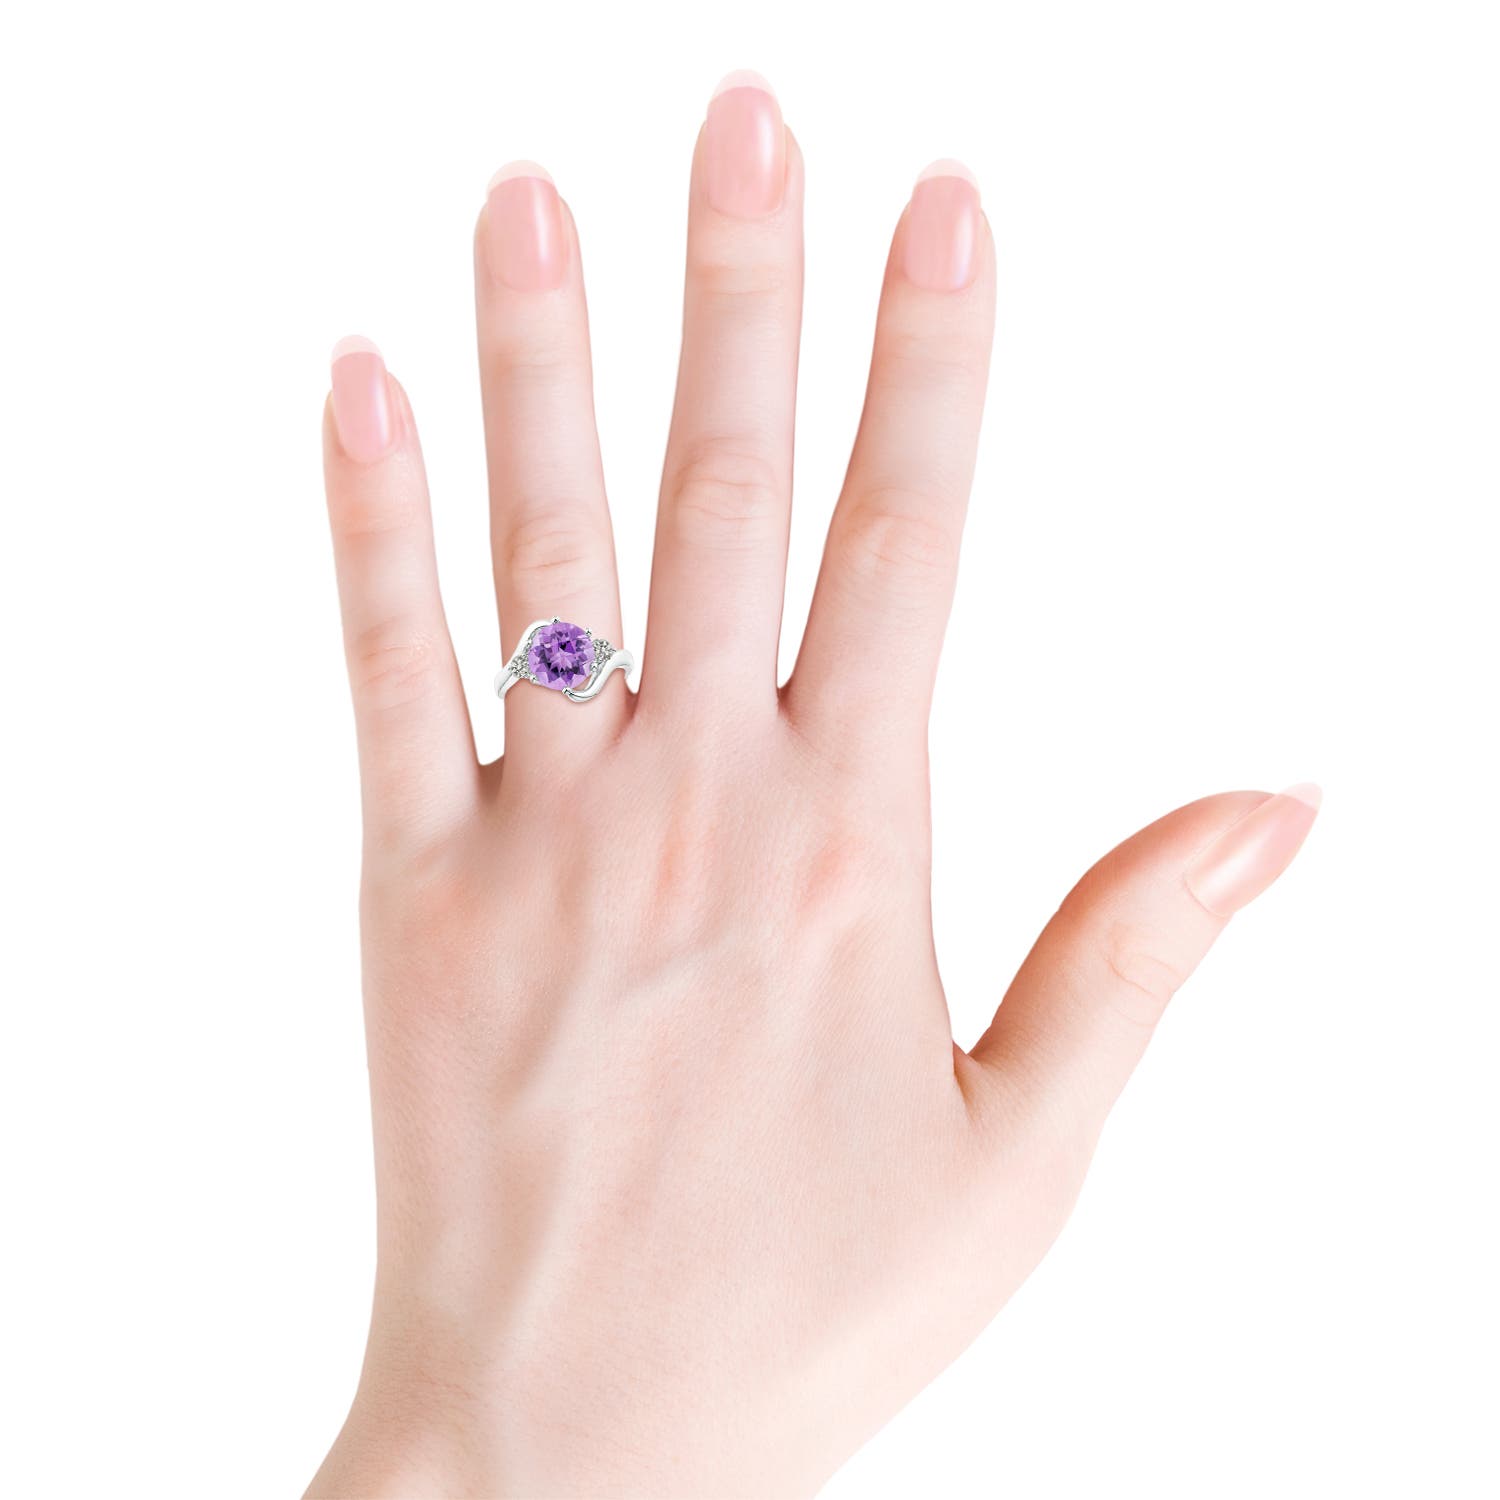 A - Amethyst / 2.31 CT / 14 KT White Gold